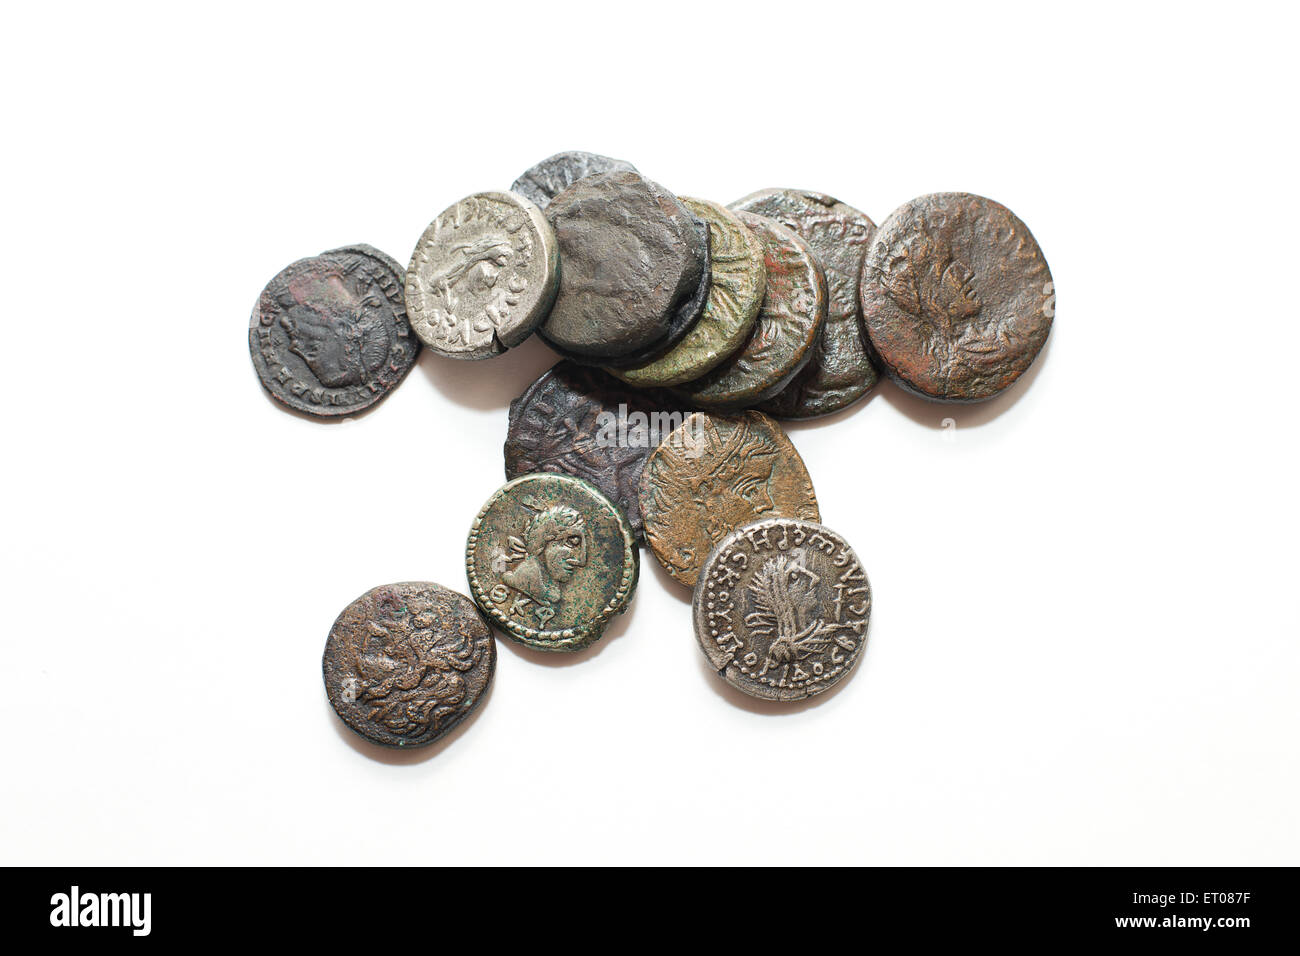 A lot of old silver coins with portraits of kings on a white background Stock Photo